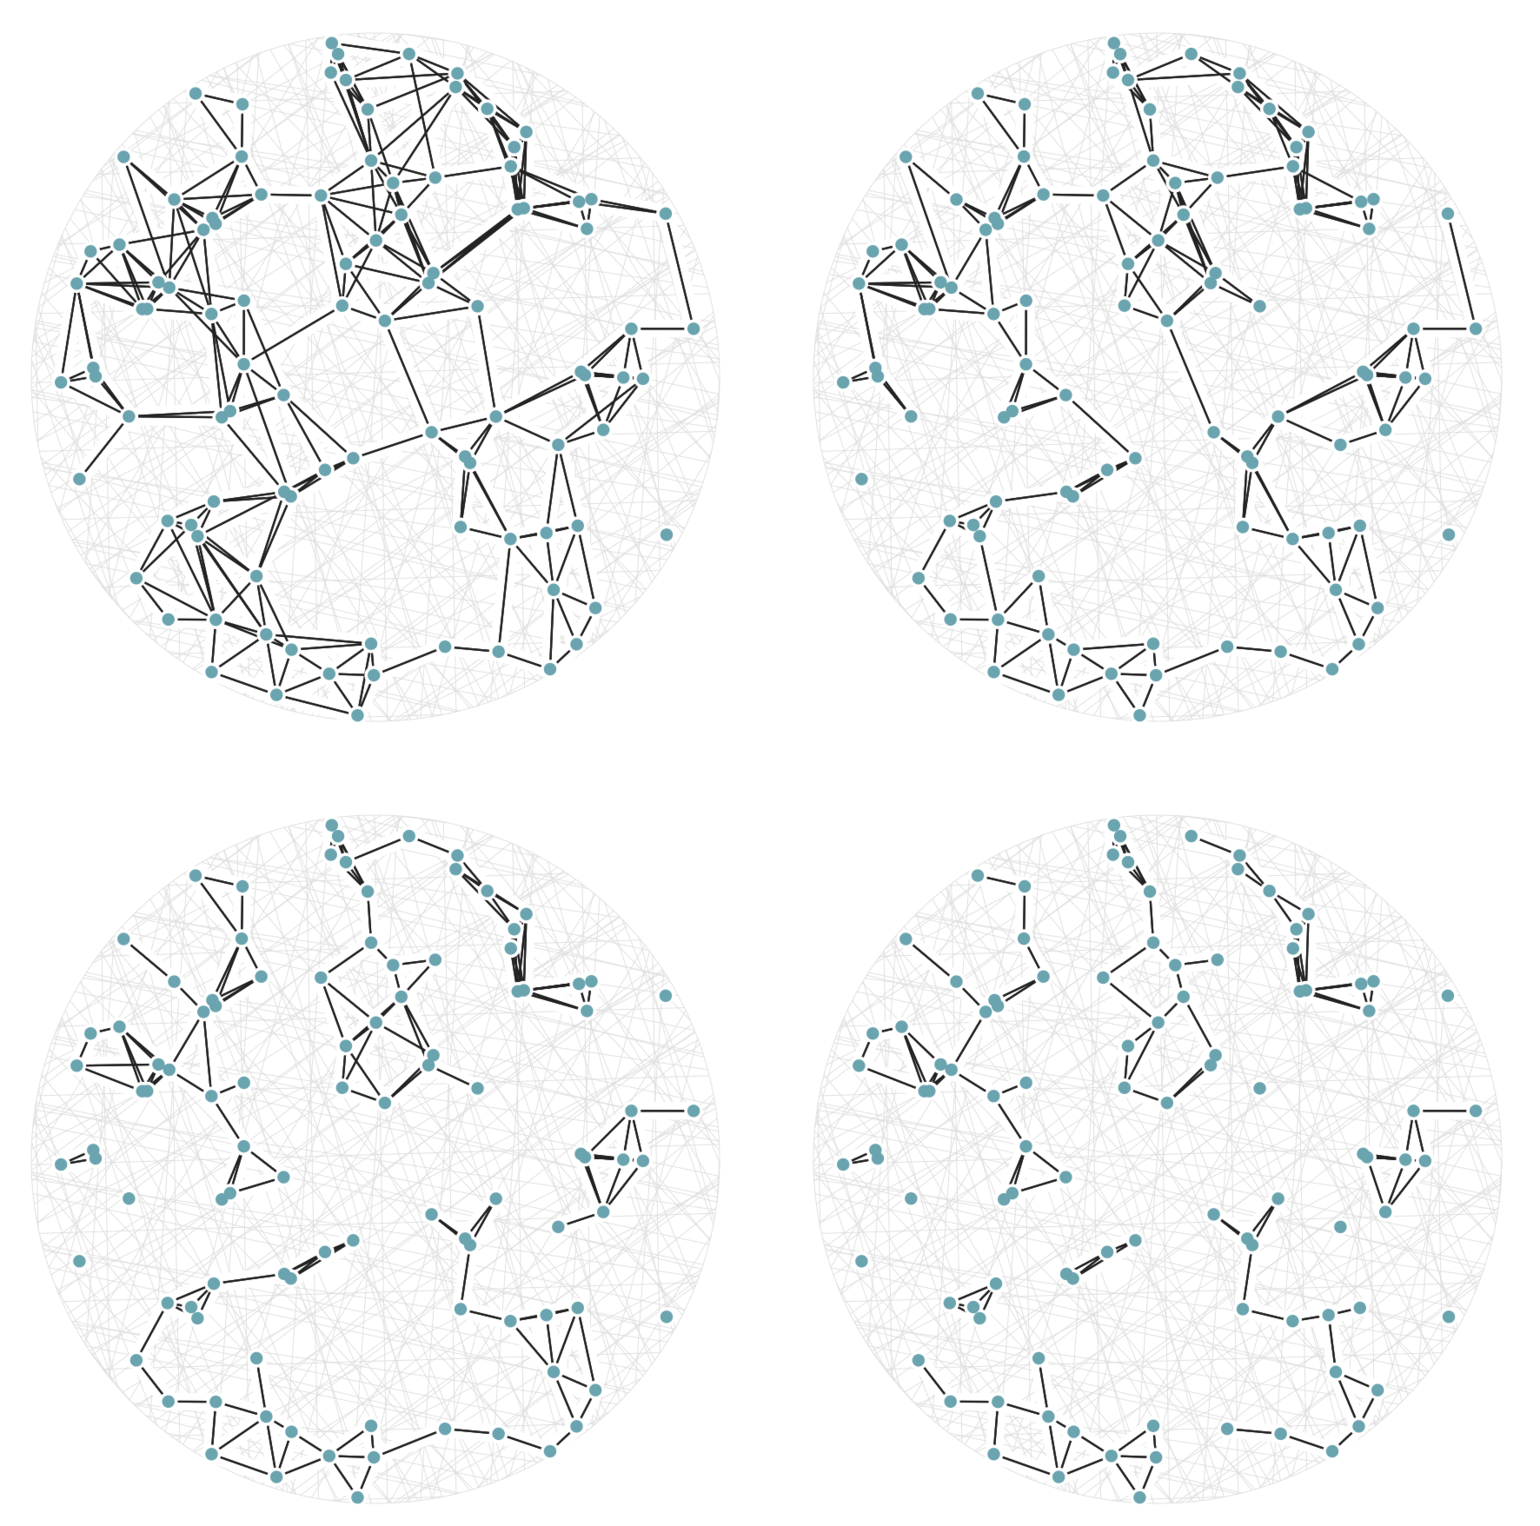 Figure 6: A set of 100 random points with graph edges drawn according to (3). There are 20 random hash functions used. The top-left graph uses the cutoff value j=6. The remaining three graphs, from top-left to bottom-right, have cutoff values j=7, 8, and 9 respectively; this means each graph is a subgraph (having a subset of the edges) of the previous one.